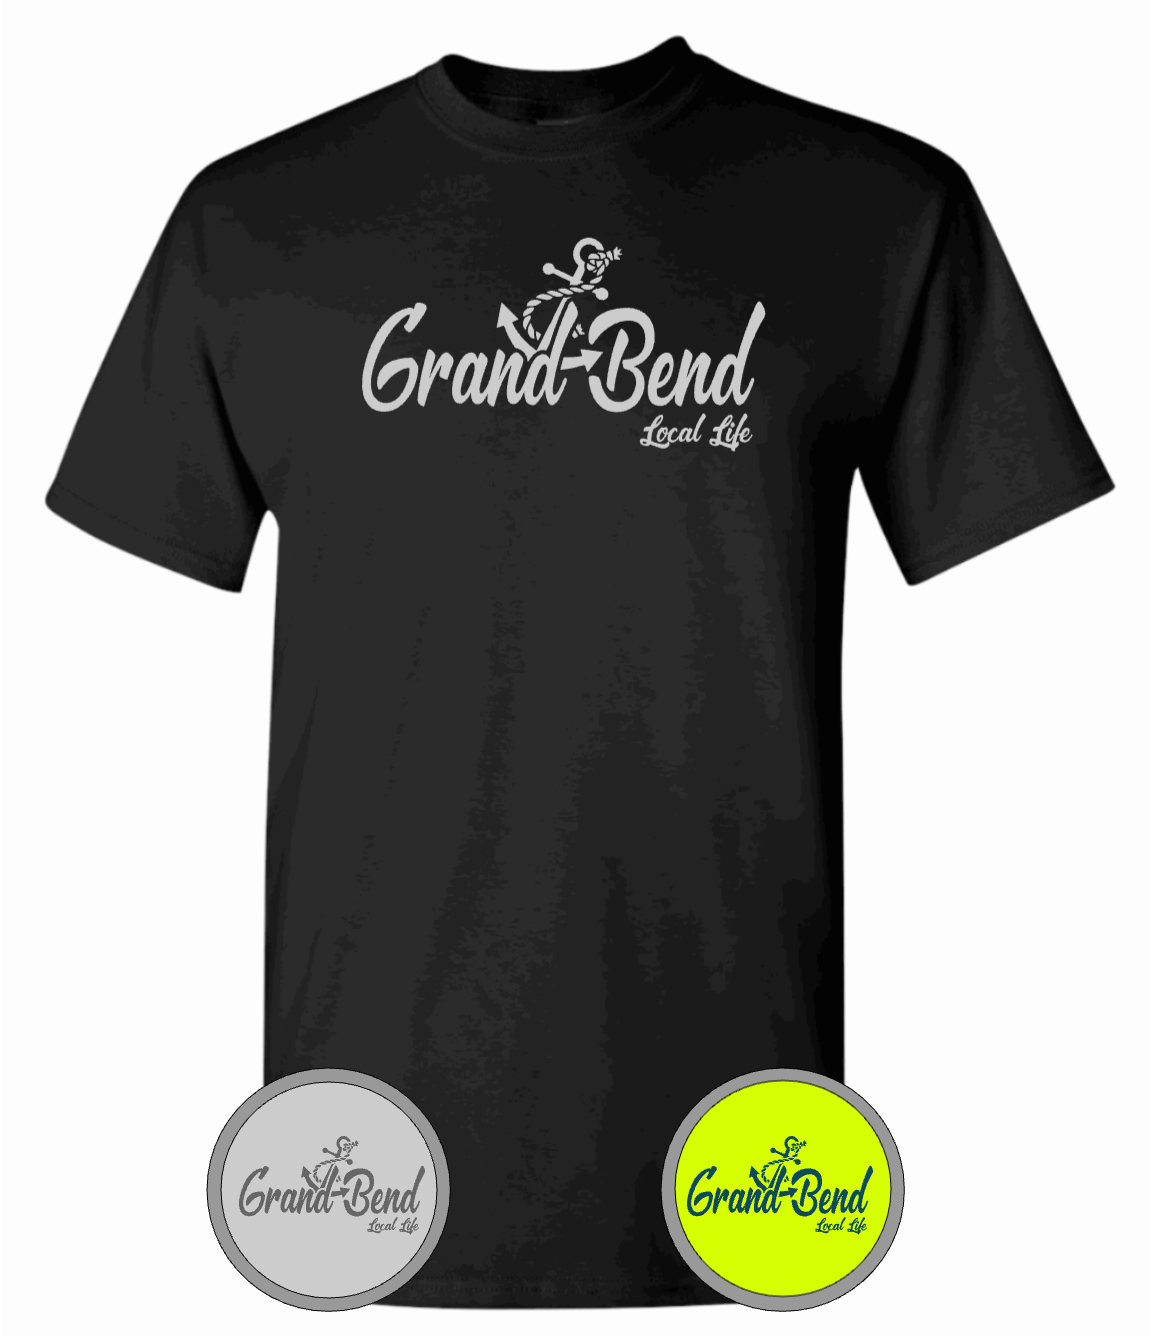 Officially Licensed Grand Bend Local Life Grand Bend Anchored T-Shirt